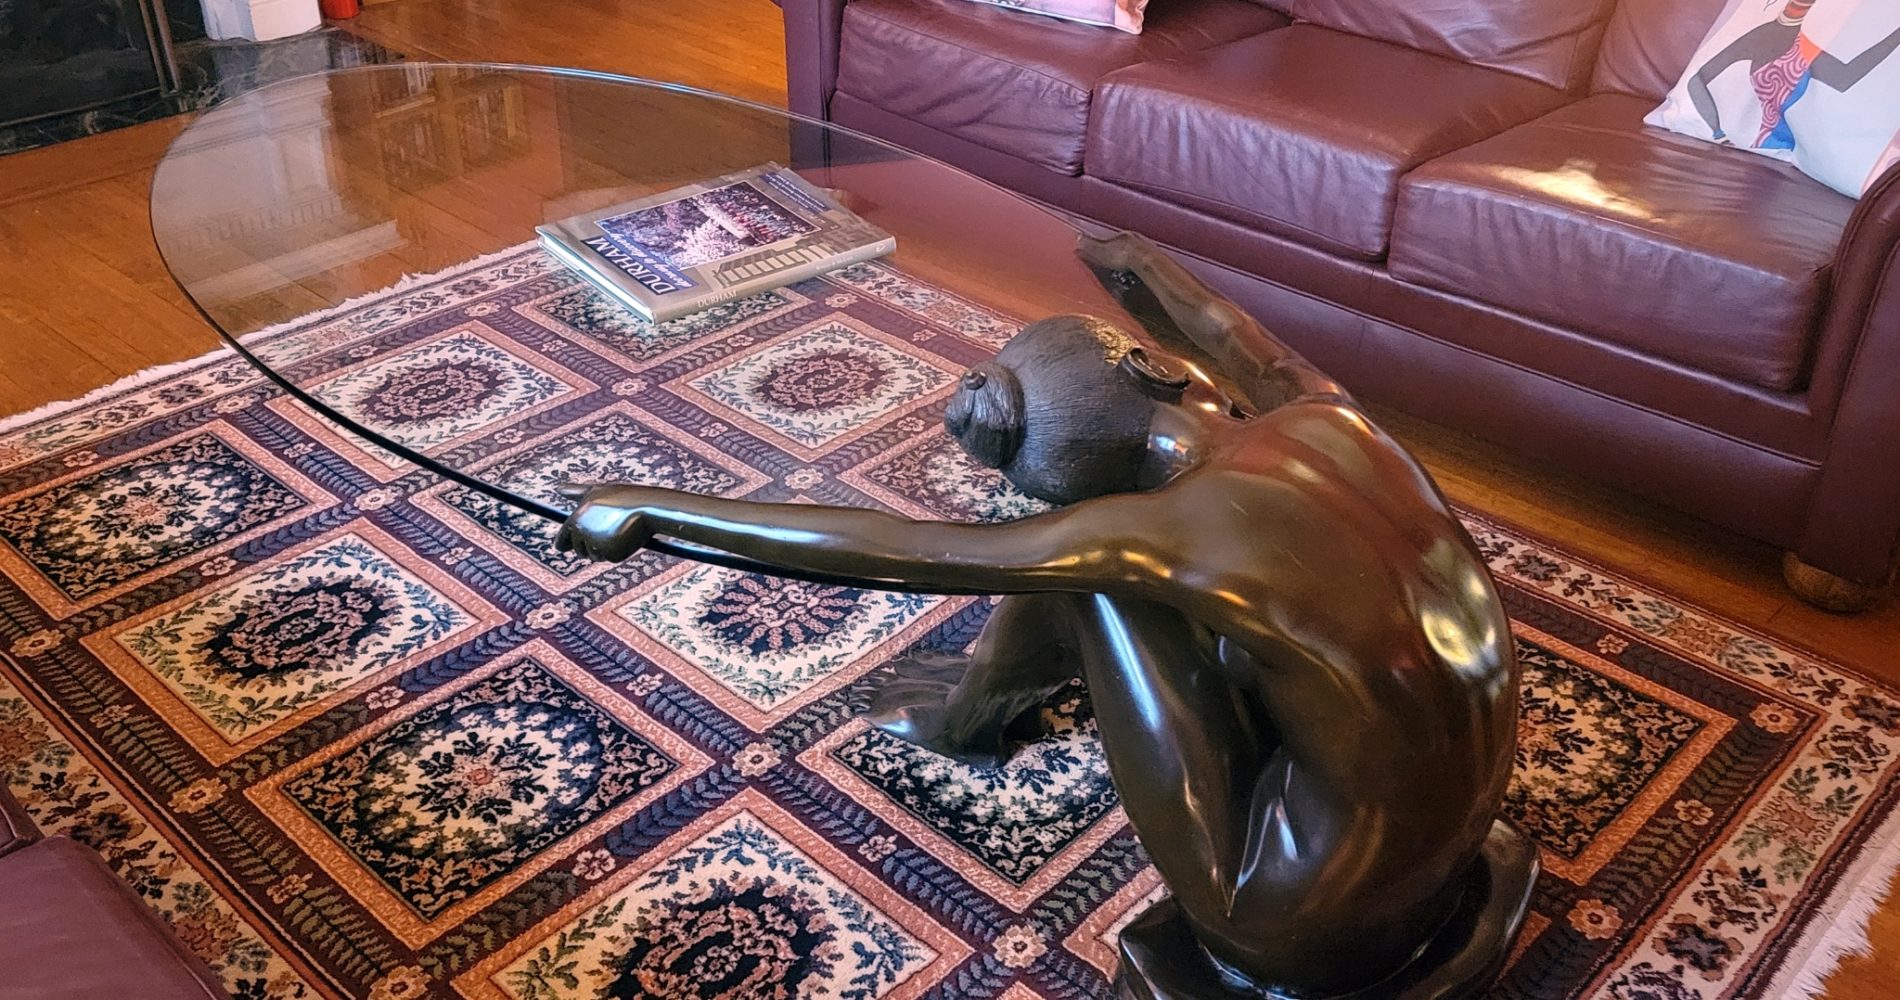 Bronze & Glass Coffee Table by Aug Moreau with a naked woman holding the glass knees raised to her chest, a on a multi colored rug in front of a burgundy leather couch